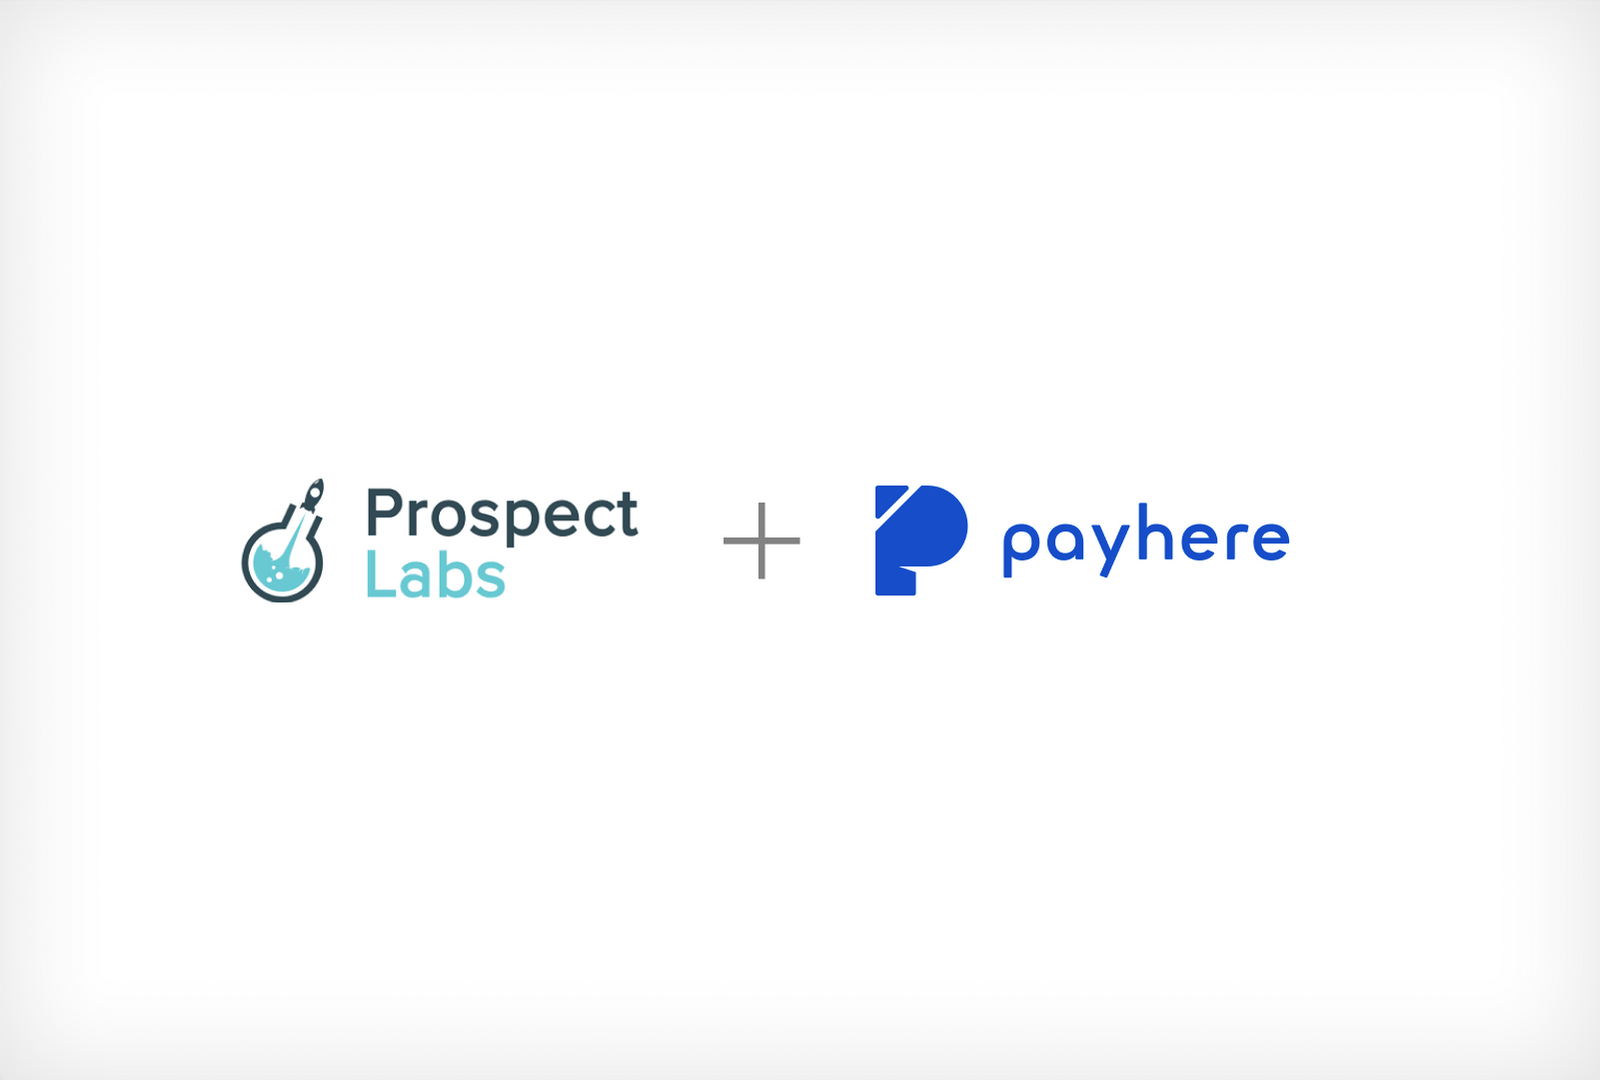 How payhere helped Prospect Labs automate their billing